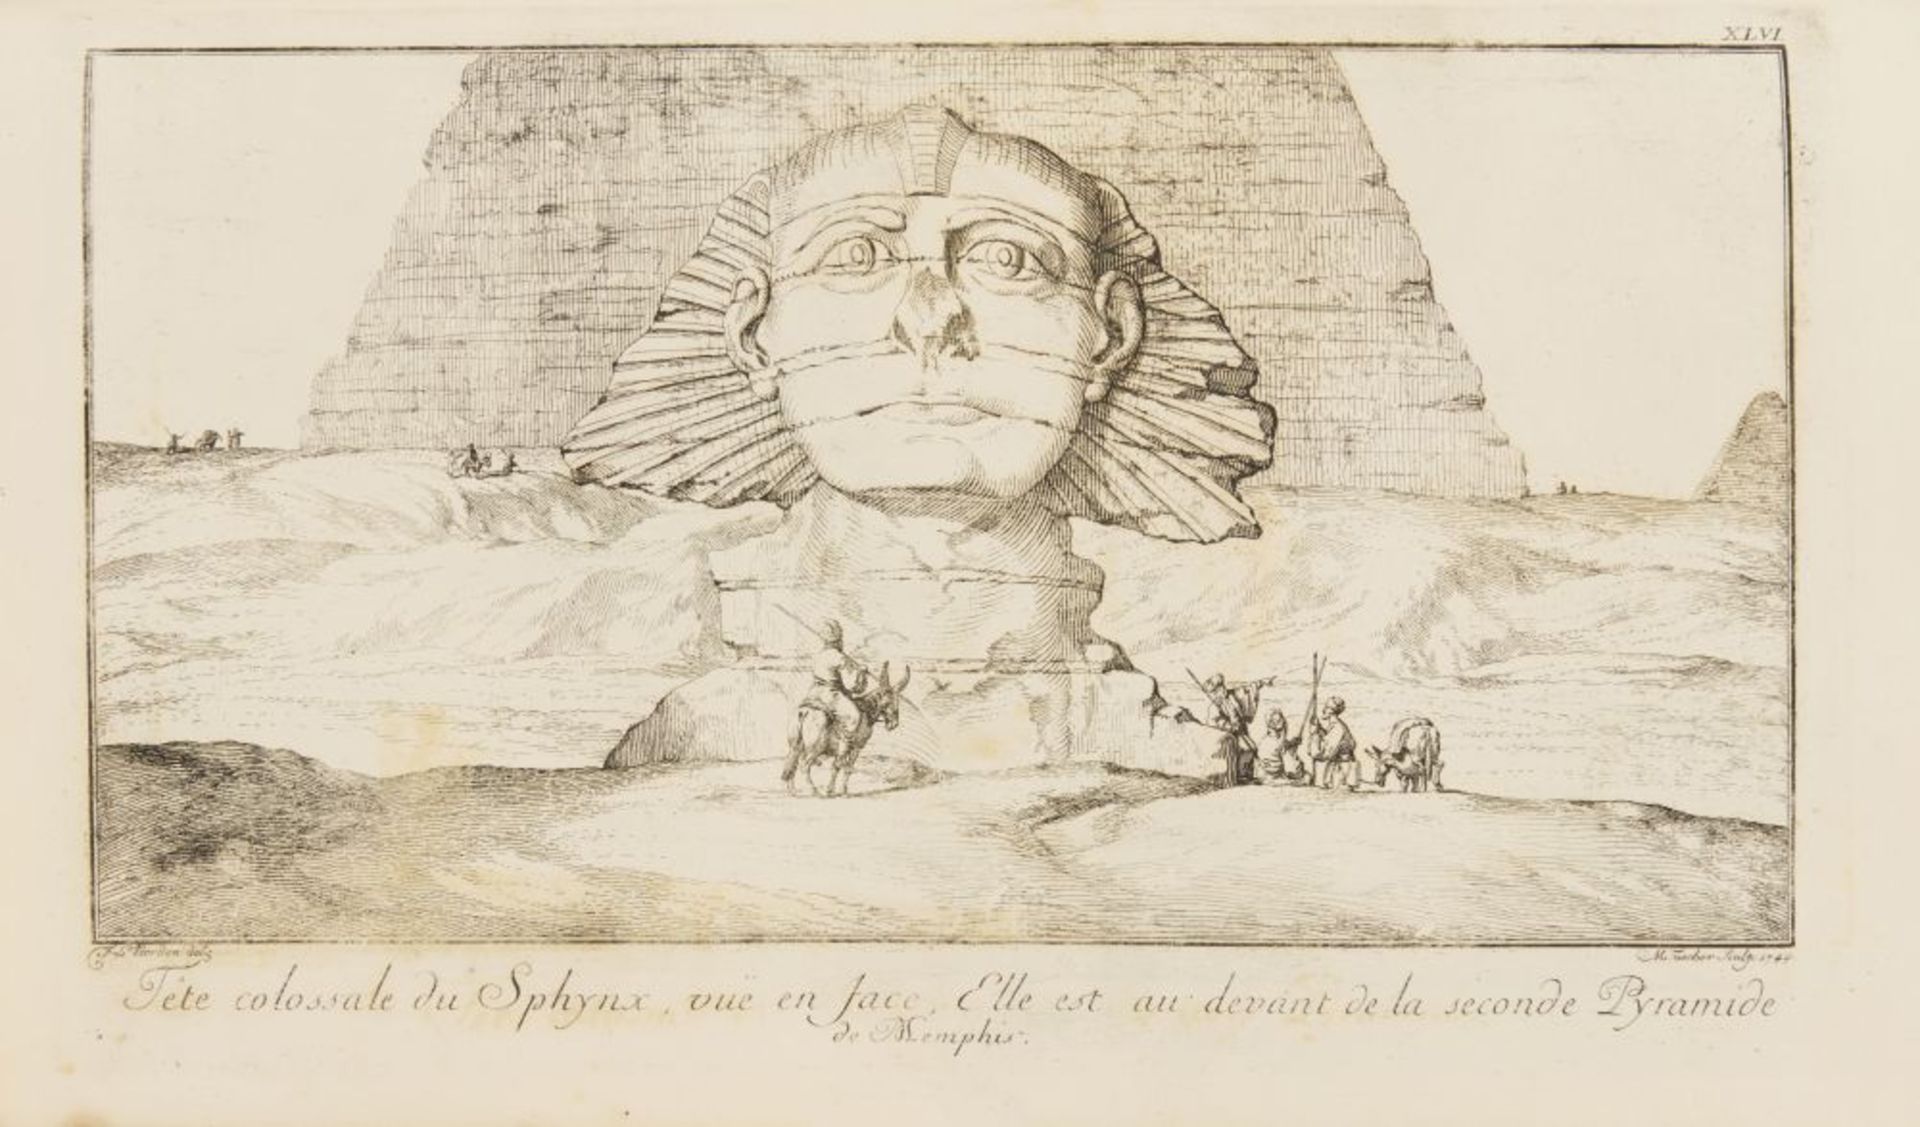 F. L. Norden, Travels in Egypt and Nubia. 2 Bde in 1. Ldn 1757. - Image 3 of 4